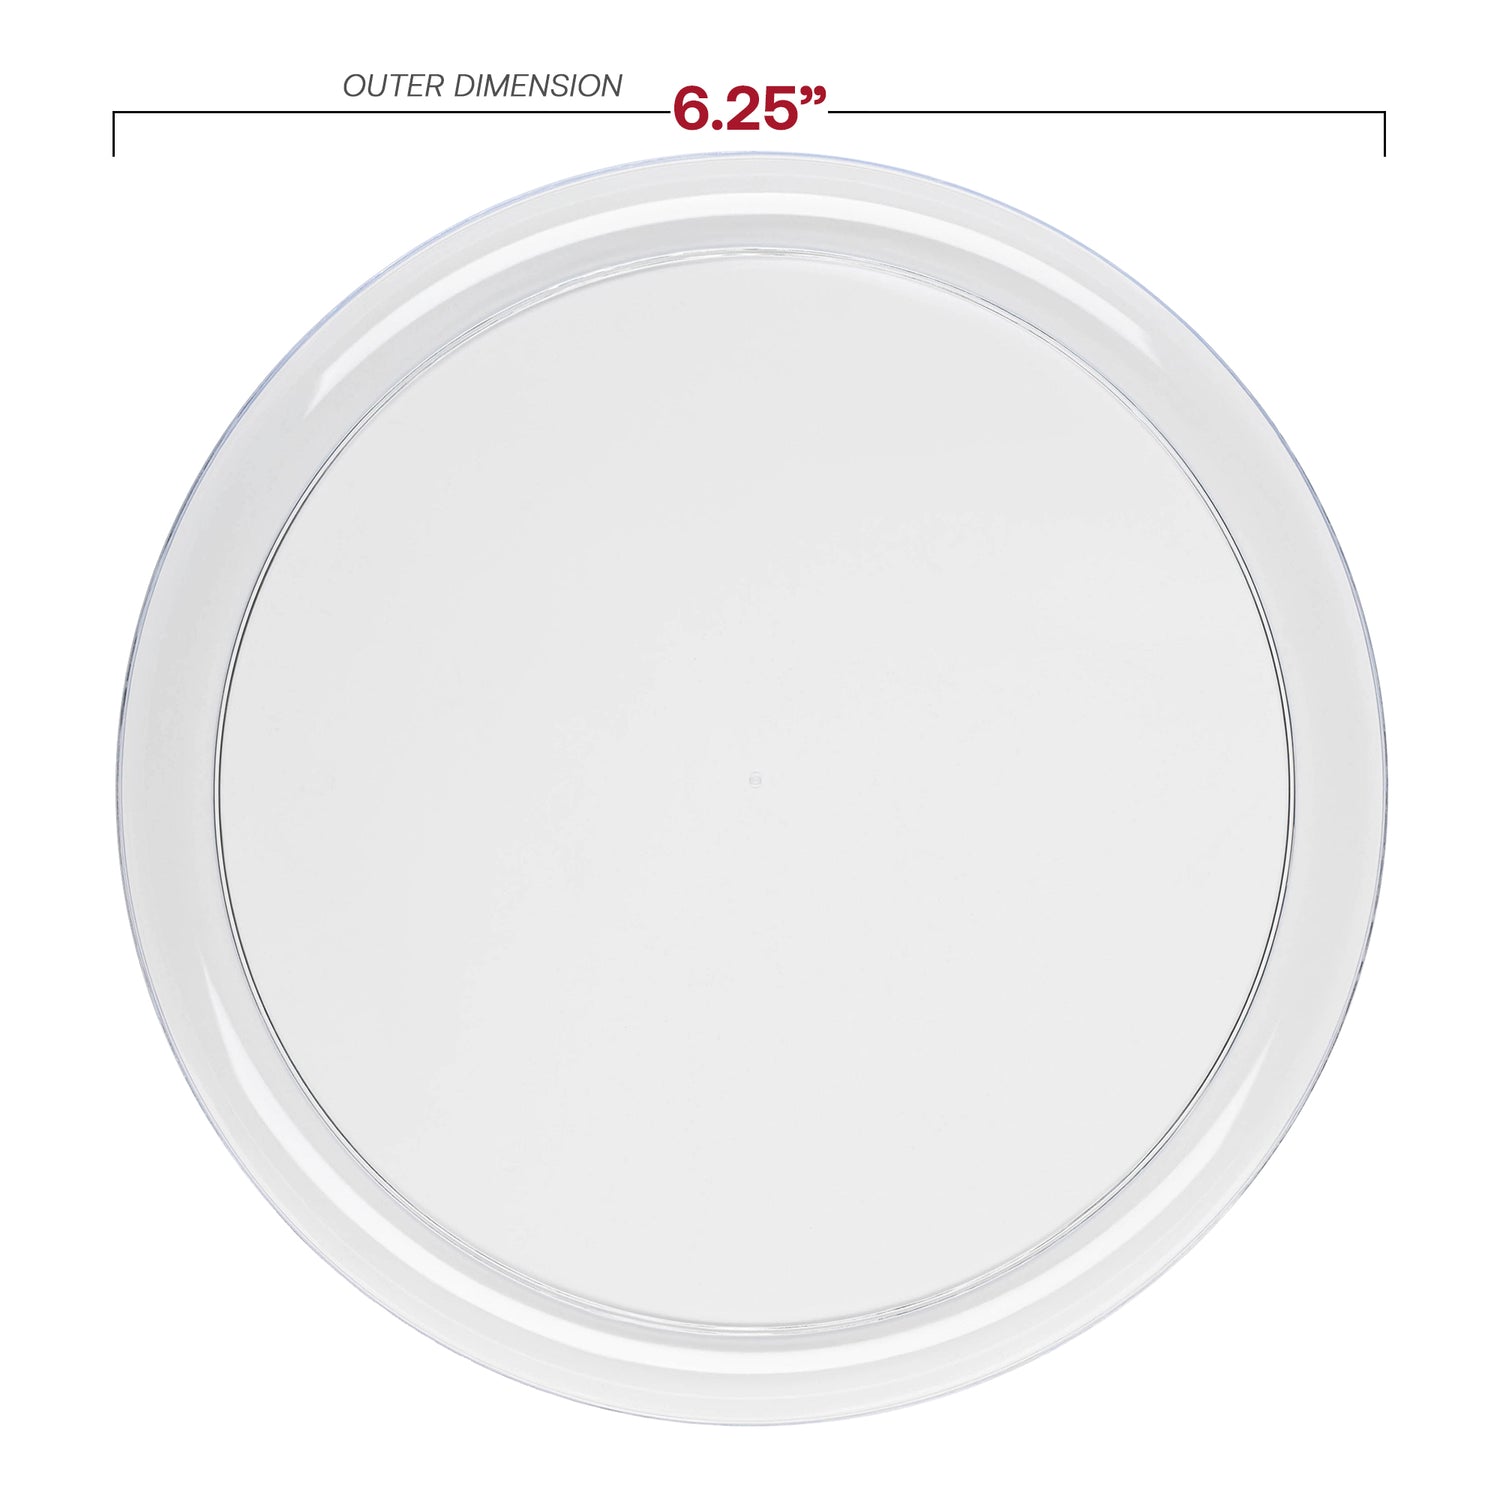 Clear Flat Round Disposable Plastic Pastry Plates (6.25") Dimension | The Kaya Collection